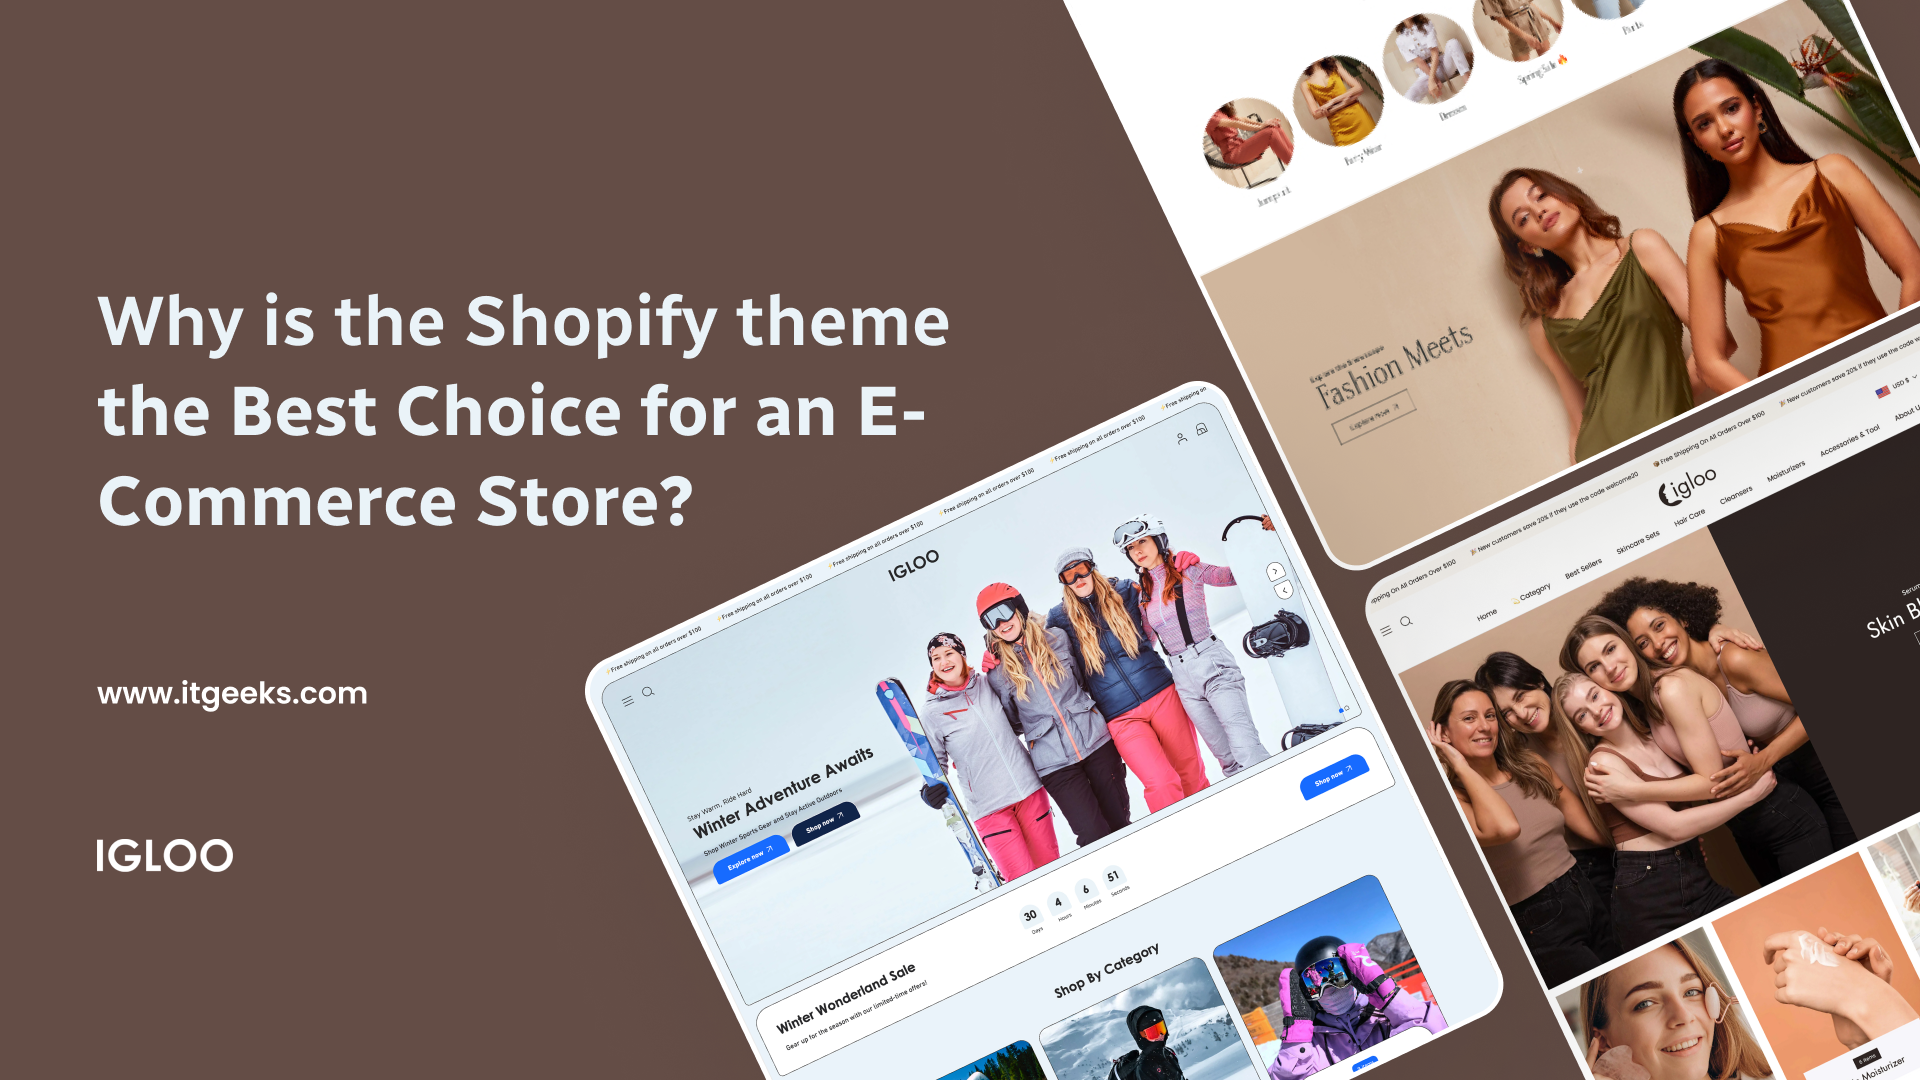 Why is the Shopify theme the best choice for an e-commerce store?